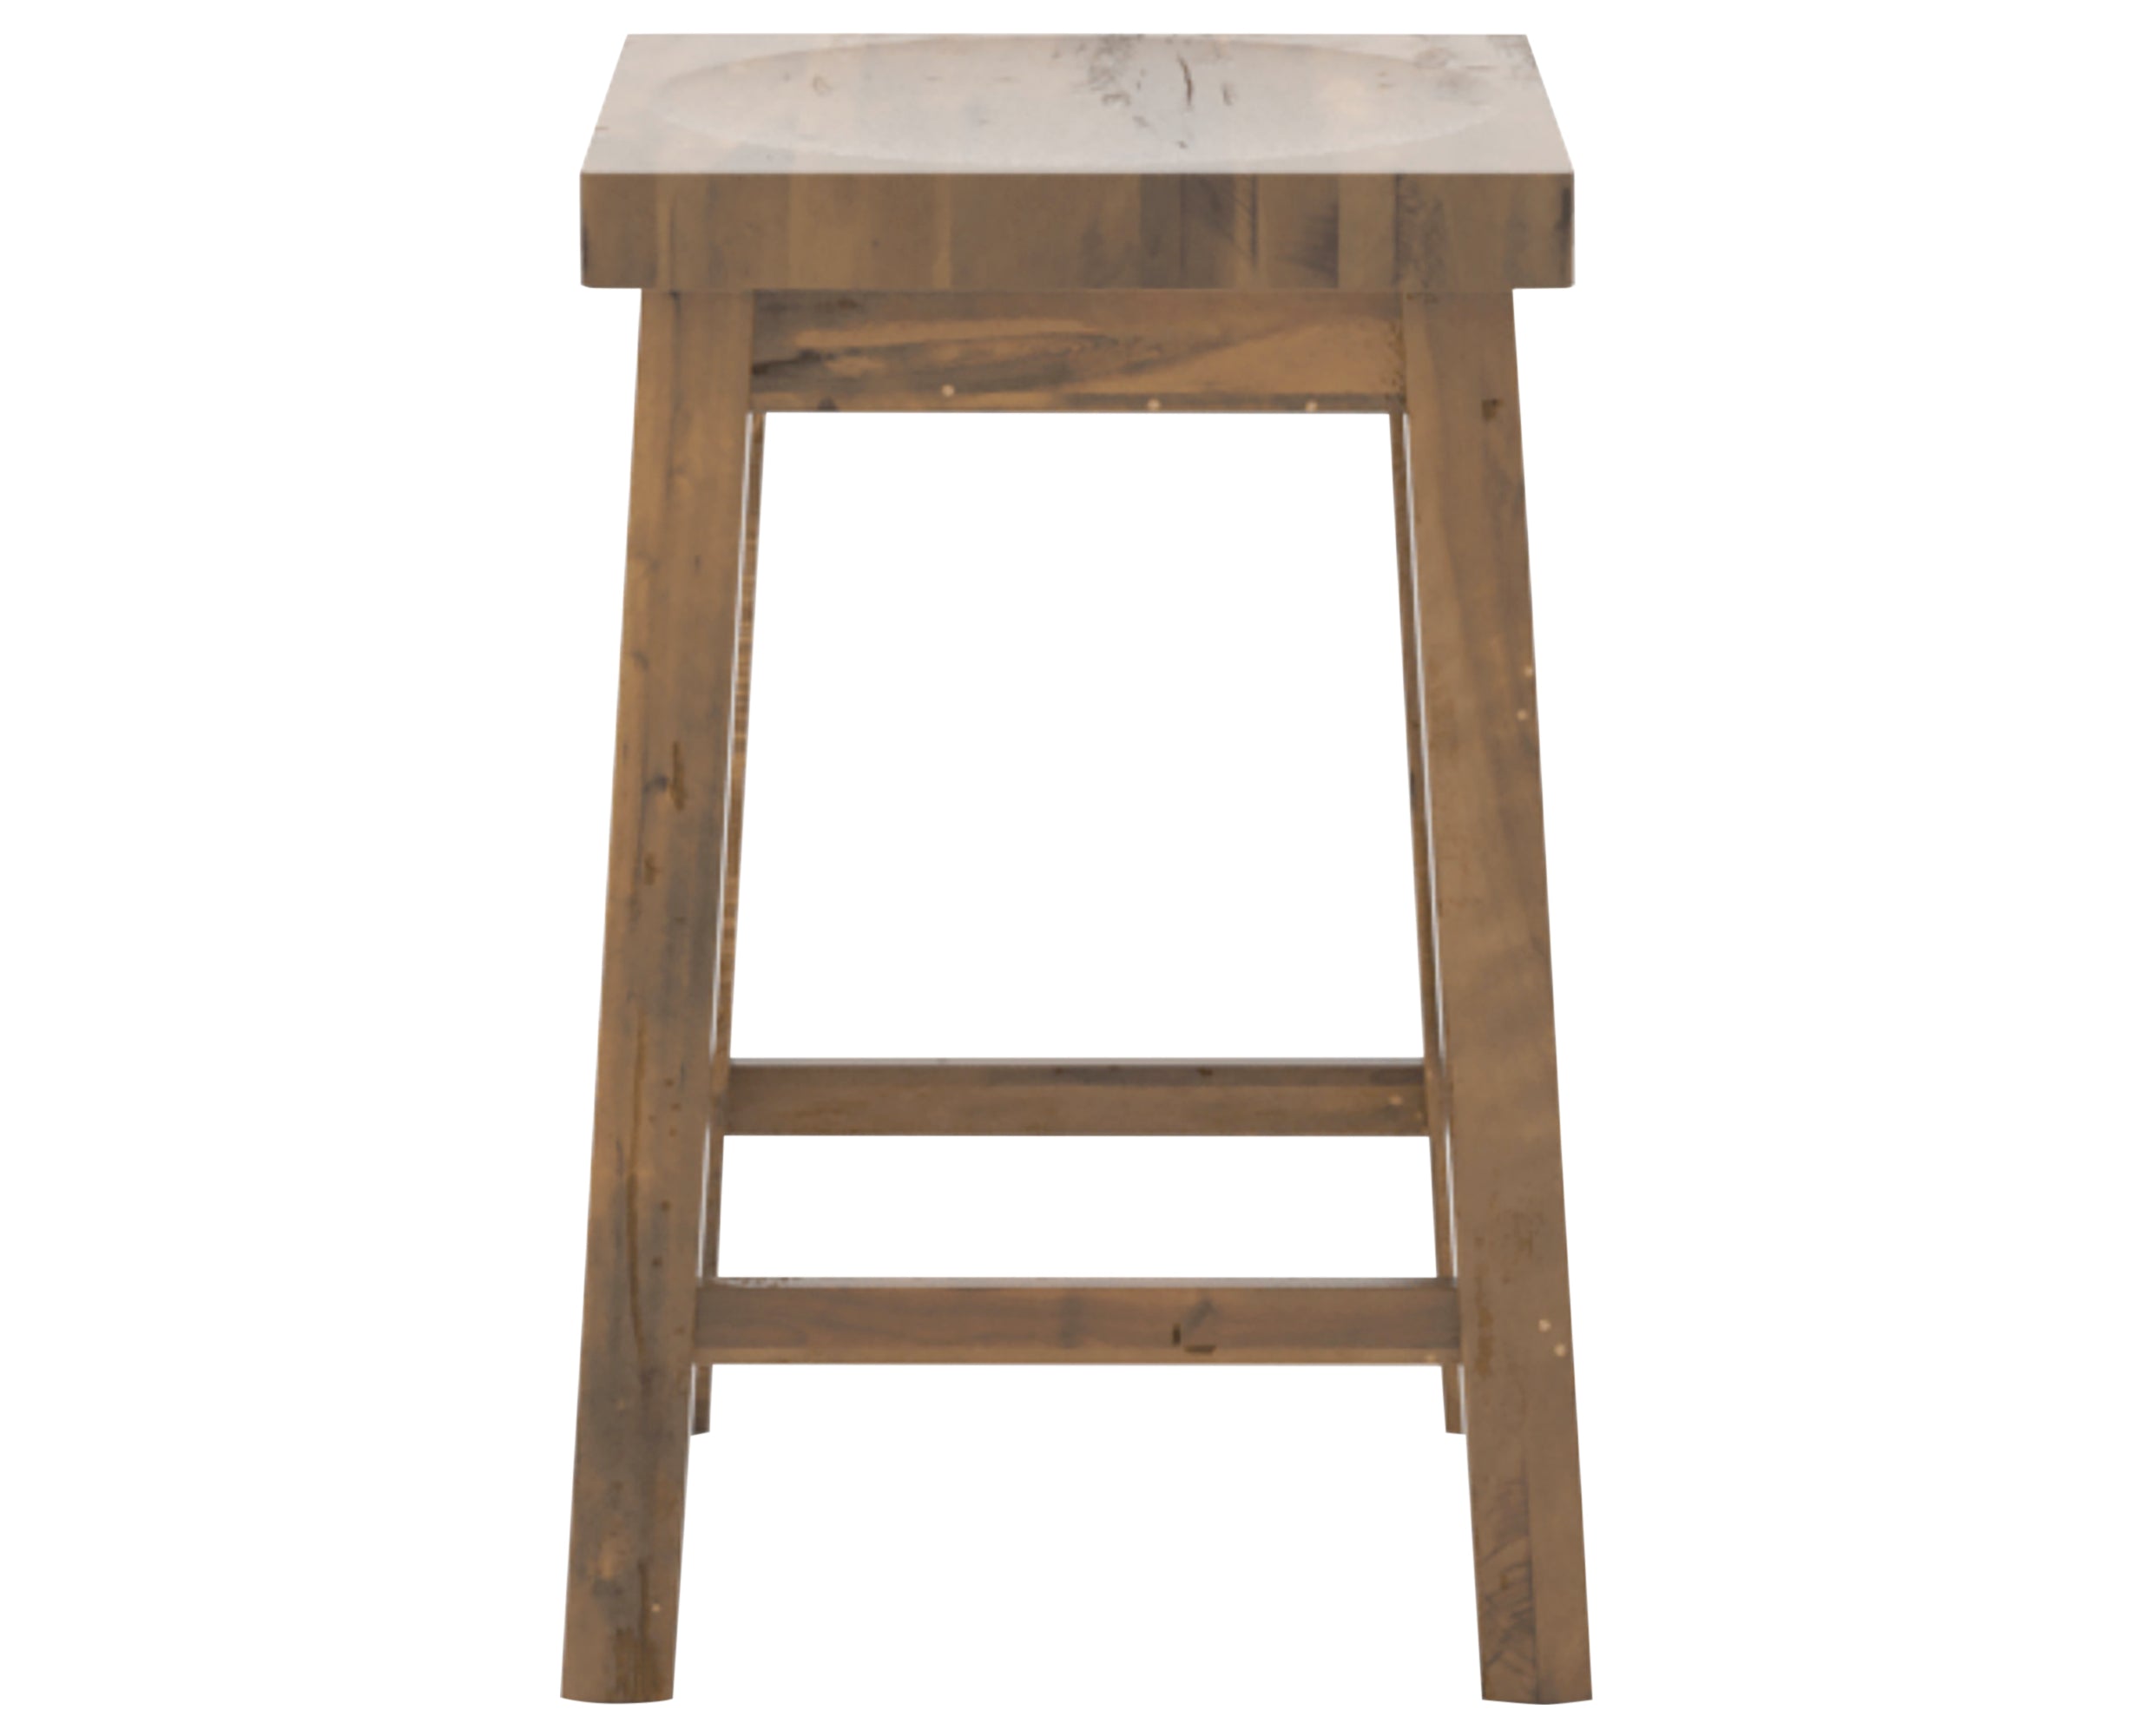 Oak Washed | Canadel Champlain Counter Stool 5057 | Valley Ridge Furniture